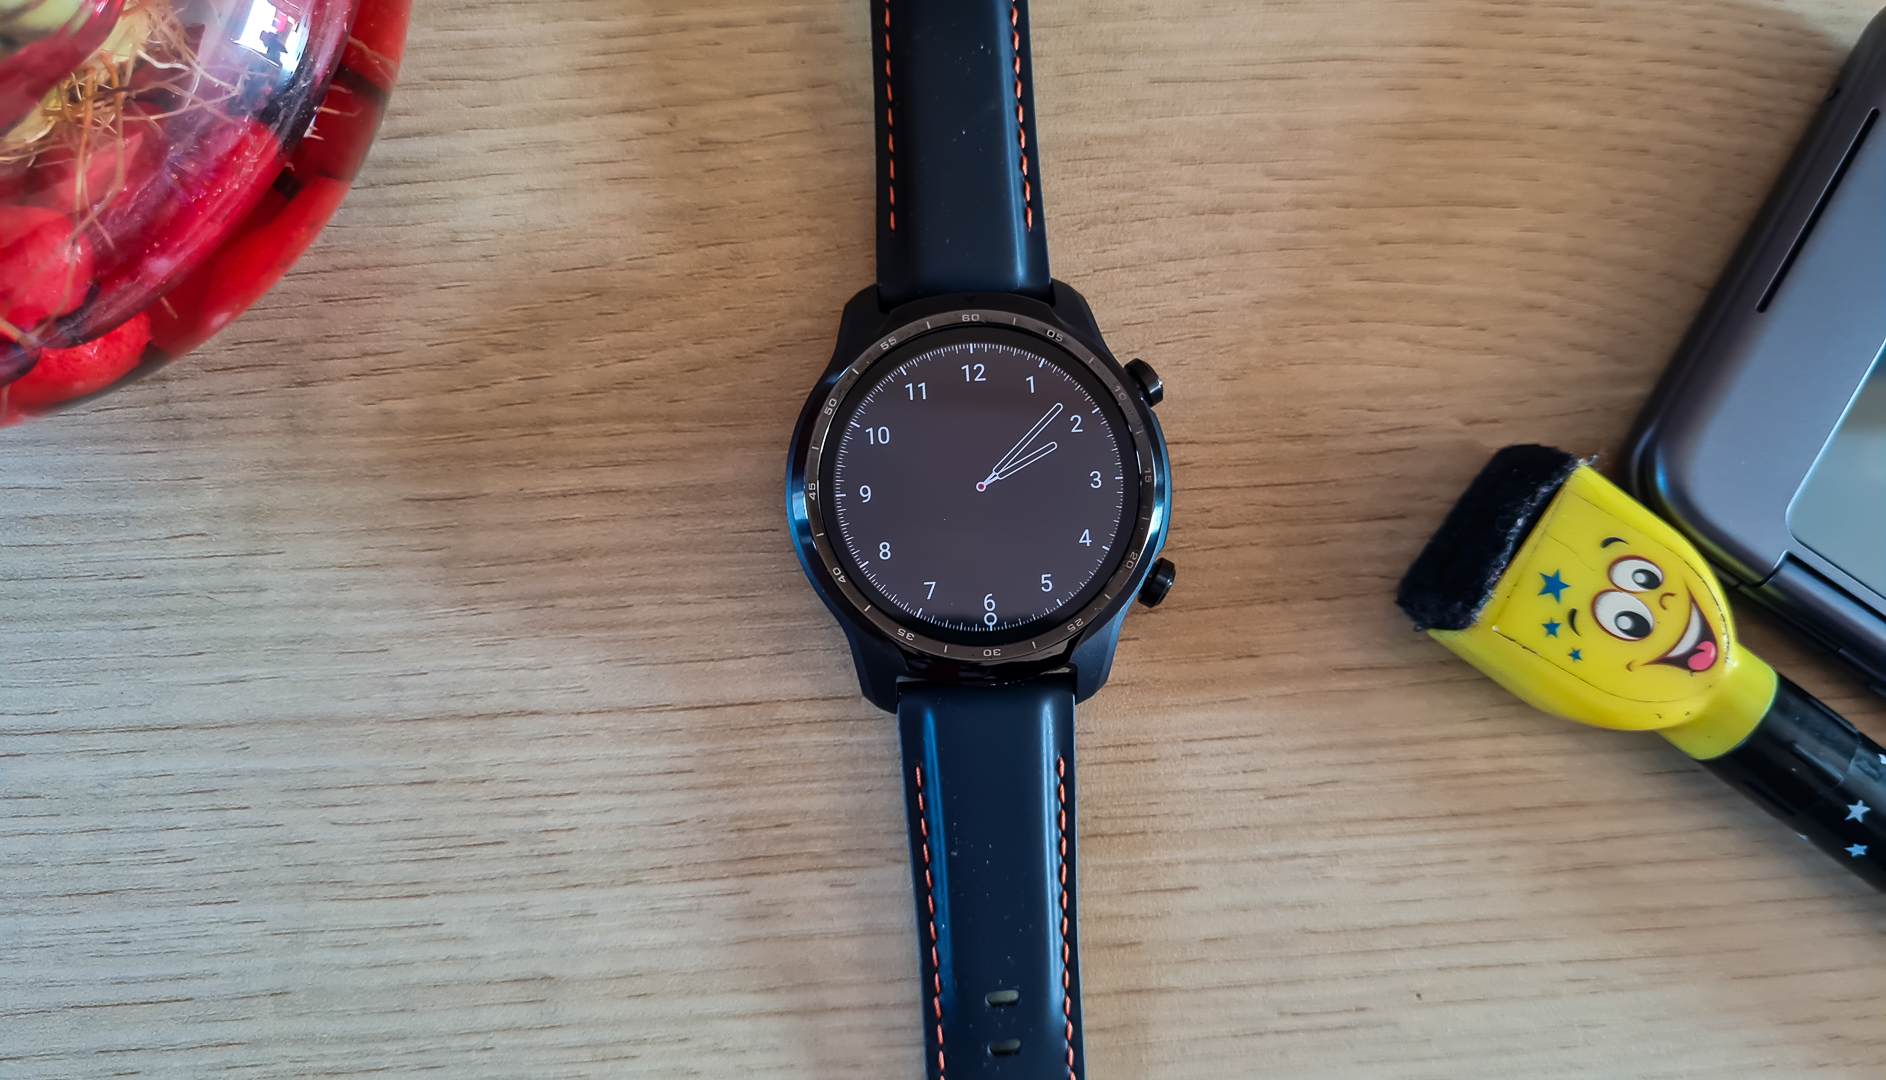 TicWatch Pro 3 Review, Pros and Cons - Should you buy it? 